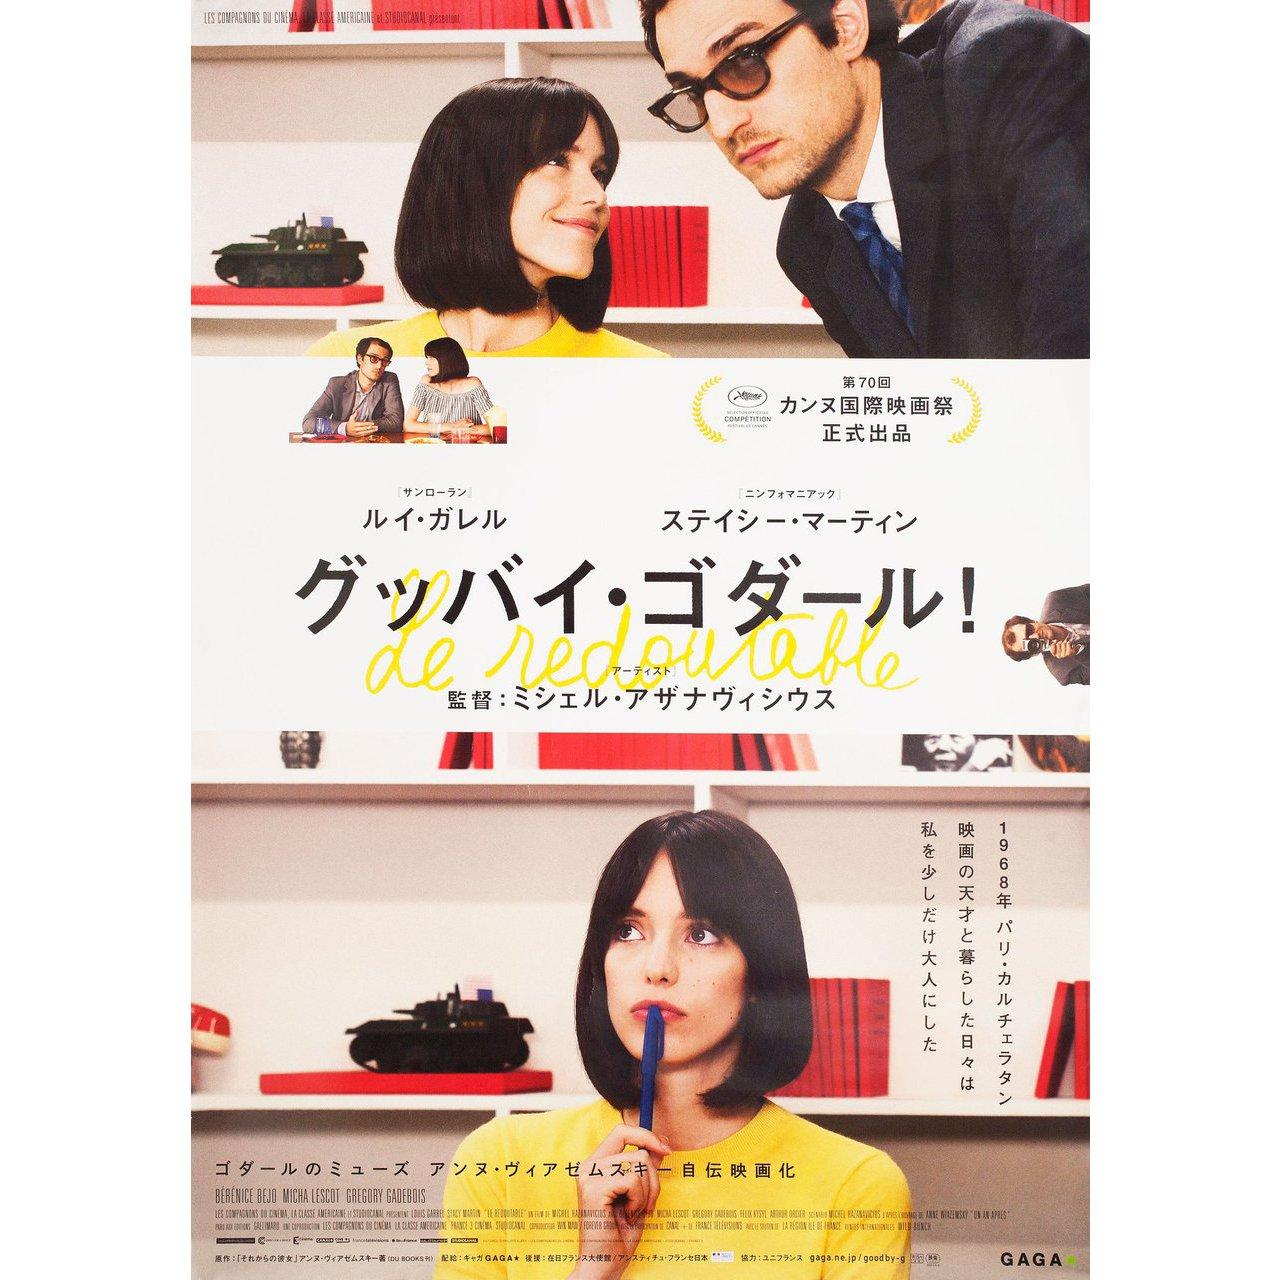 Original 2017 Japanese B1 poster for the film Godard Mon Amour (Le Redoutable) directed by Michel Hazanavicius with Louis Garrel / Stacy Martin / Berenice Bejo / Micha Lescot. Fine condition, rolled. Please note: the size is stated in inches and the